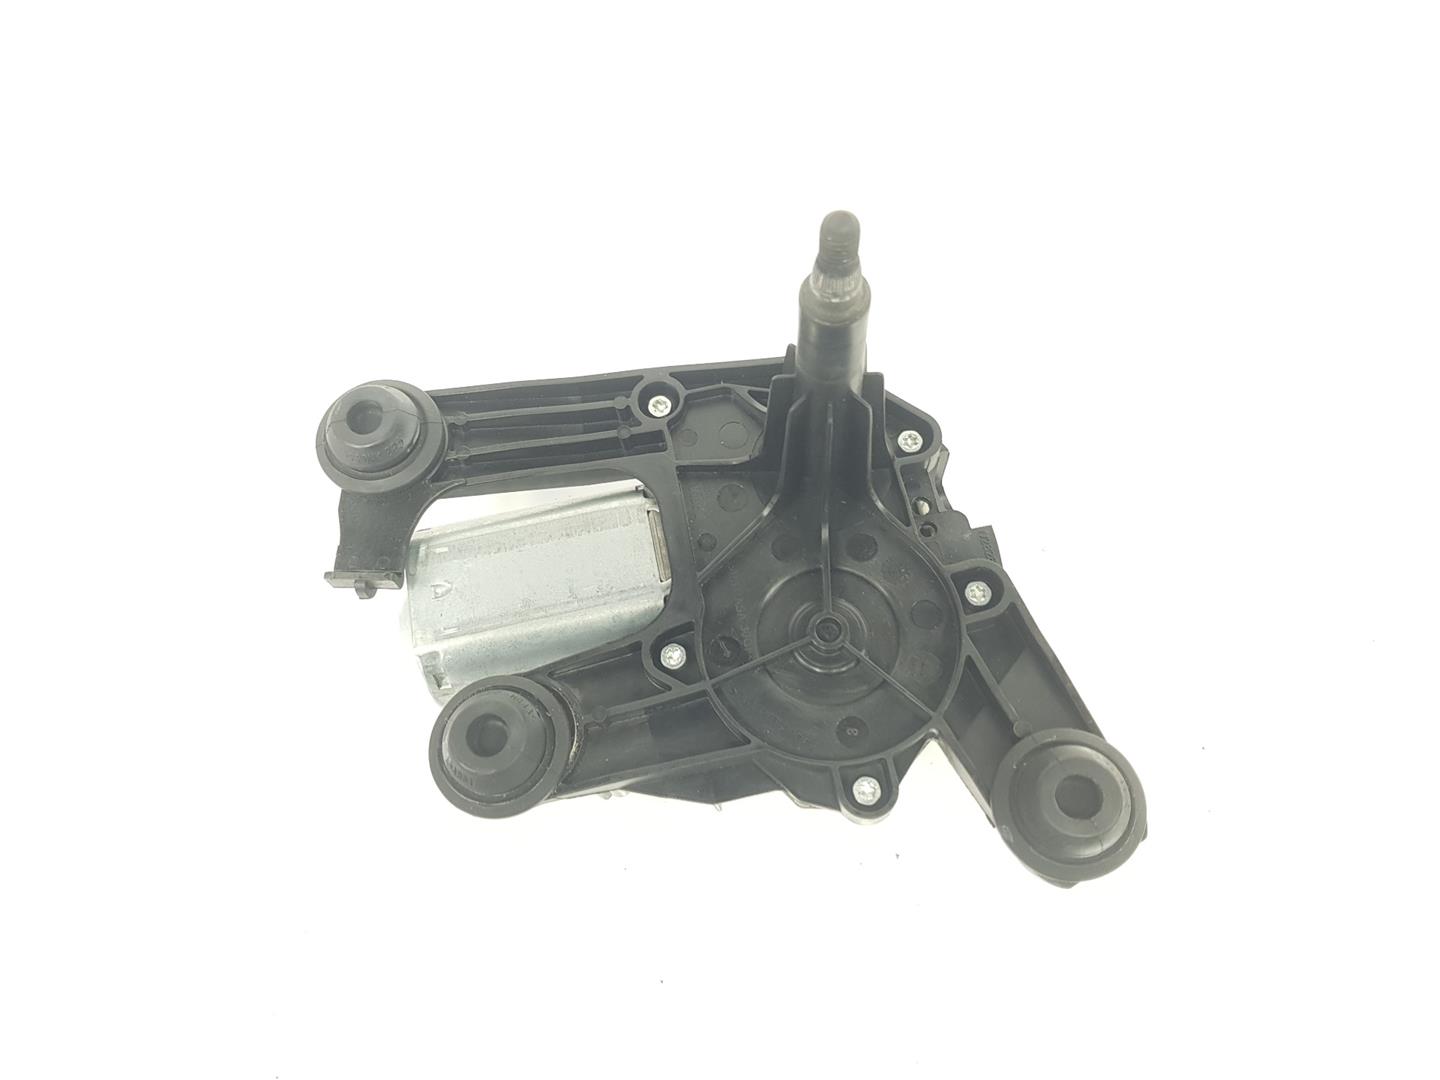 CITROËN C3 Picasso 1 generation (2008-2016) Tailgate  Window Wiper Motor 6405NW, 9683238880, 2222DL 19898202